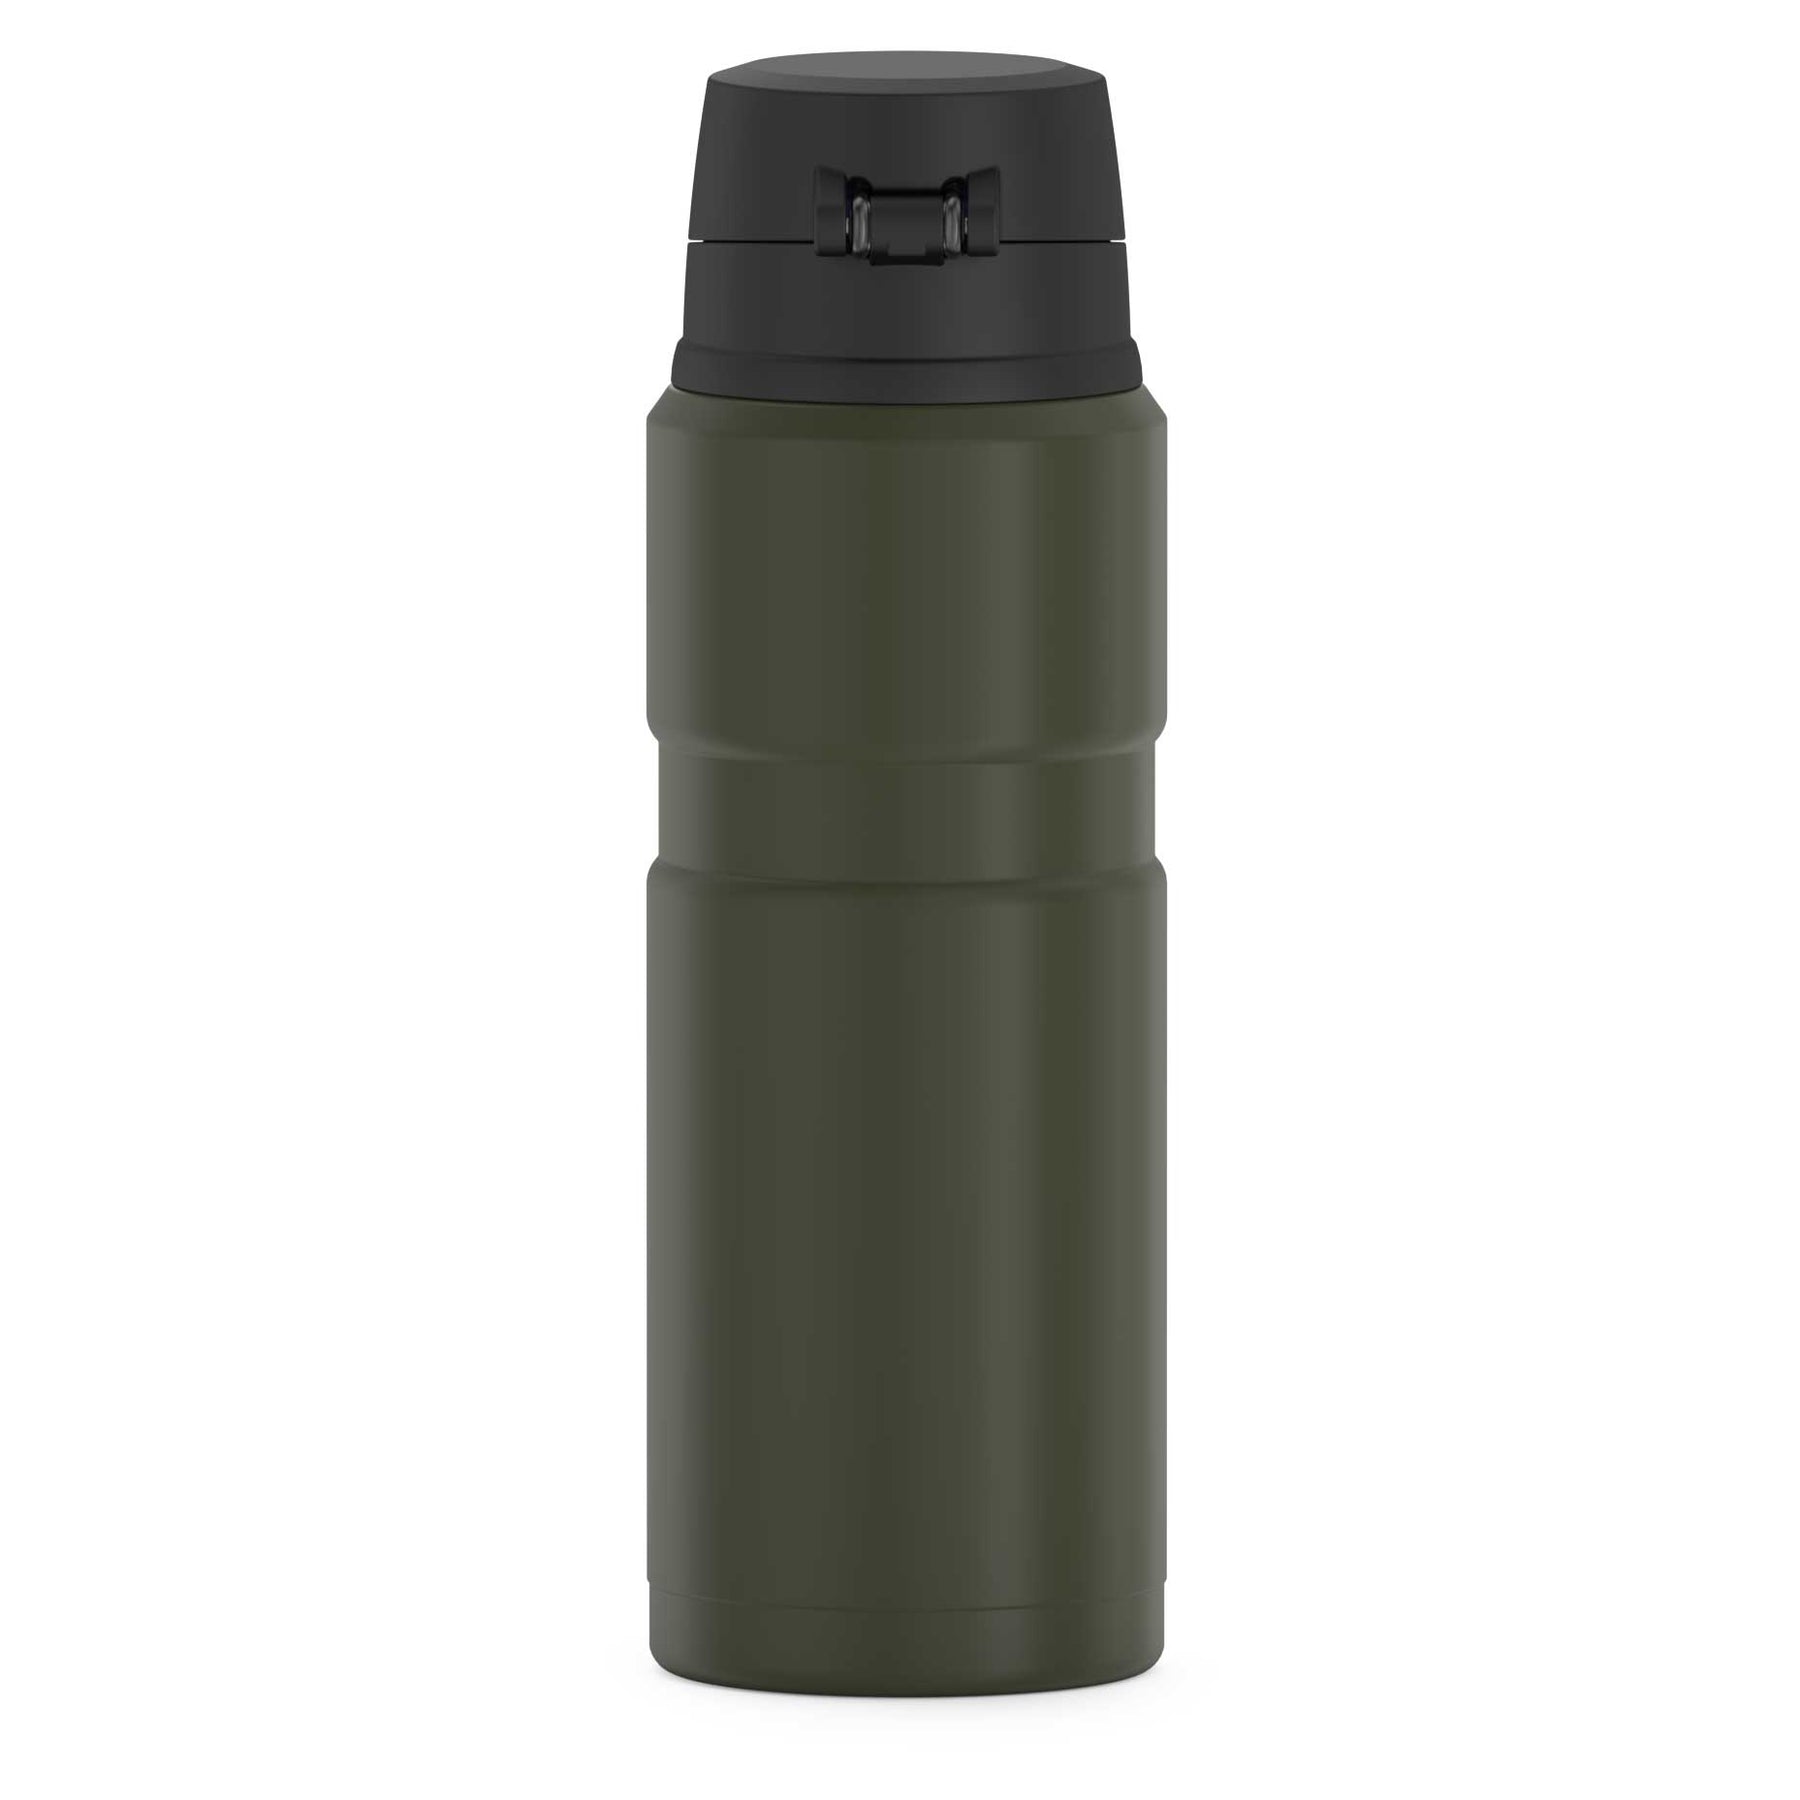 Promotional 24 oz. Thermos Stainless King Stainless Steel Direct Drink Bottle - Qty: 12